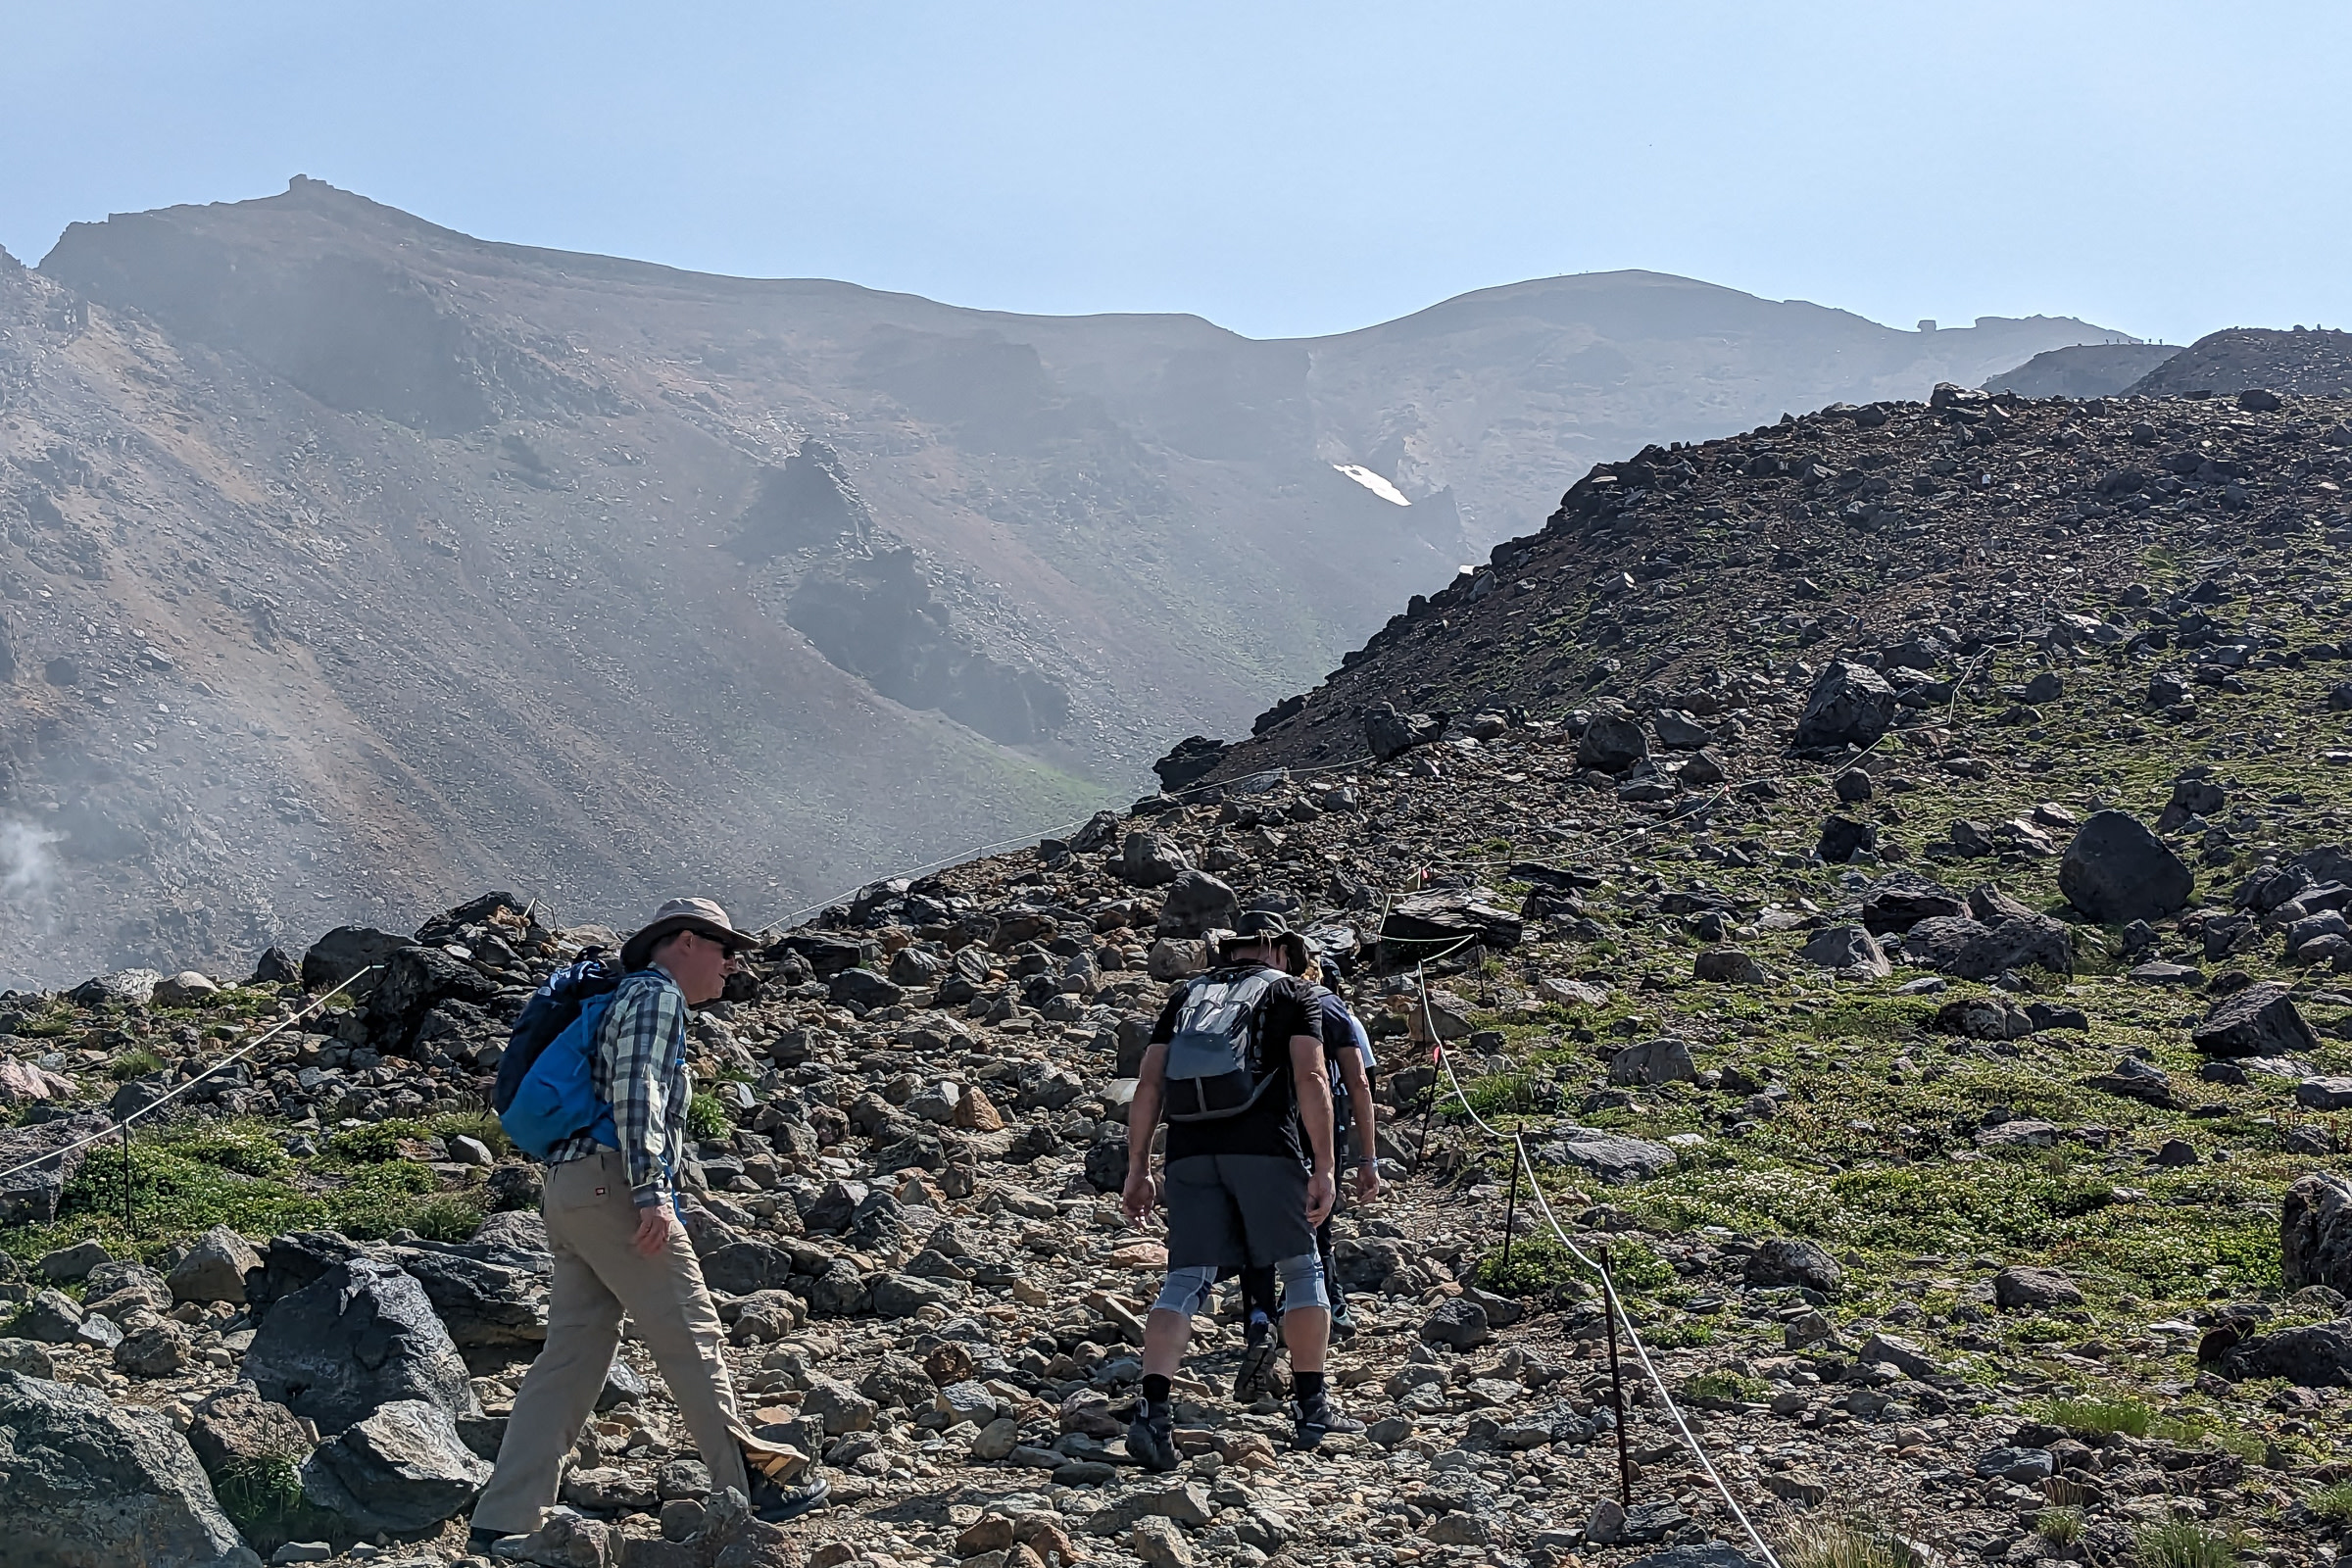 A group of three hikers climb up a rocky path on the way to the summit of Mt. Asahidake. It is a bright sunny day.